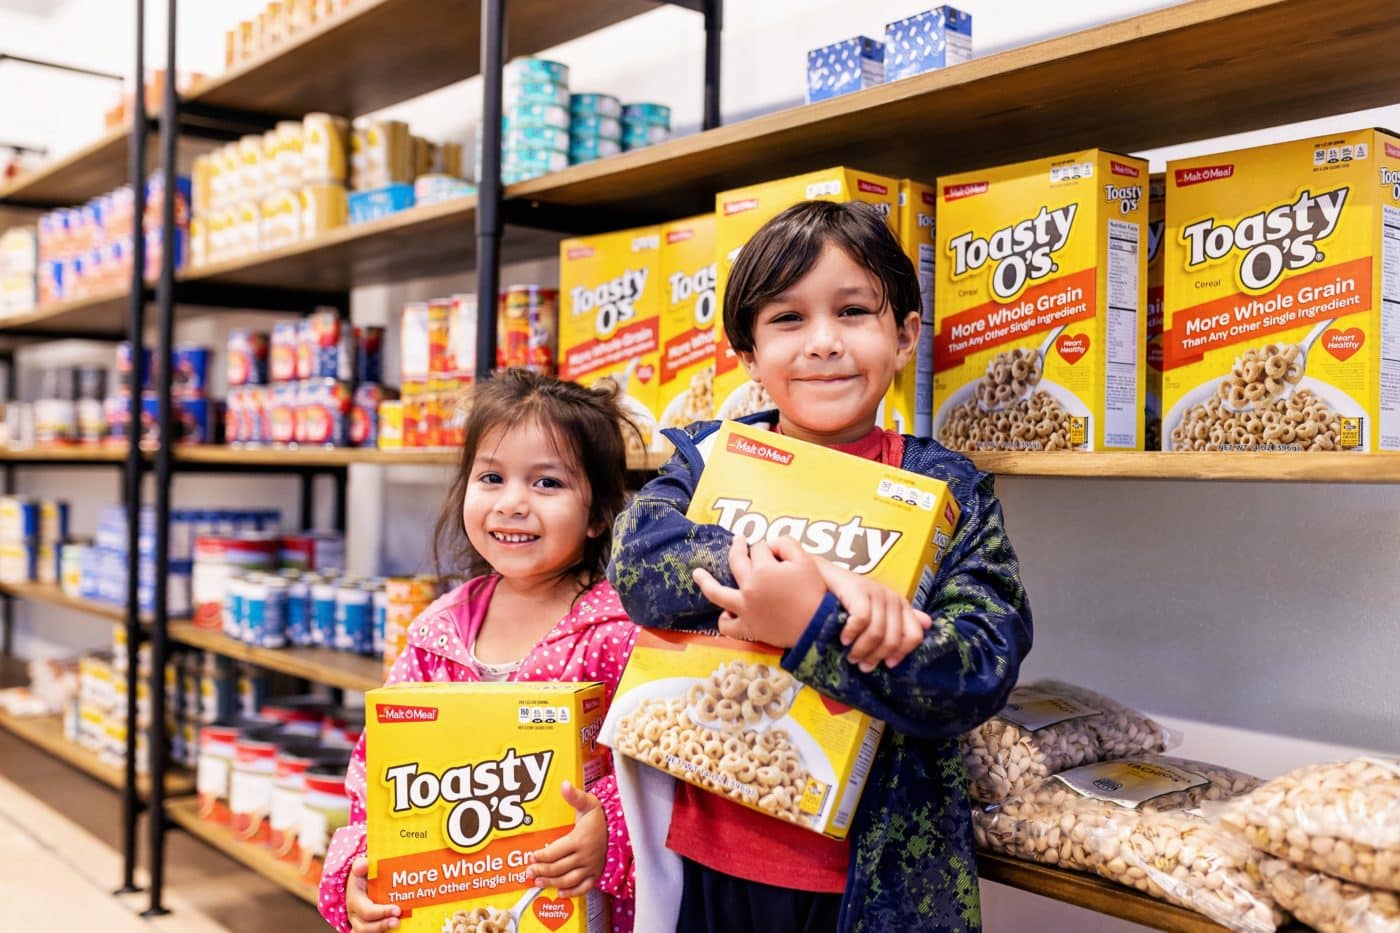 A young boy and girl holding cereal boxes in front of shelves of food.